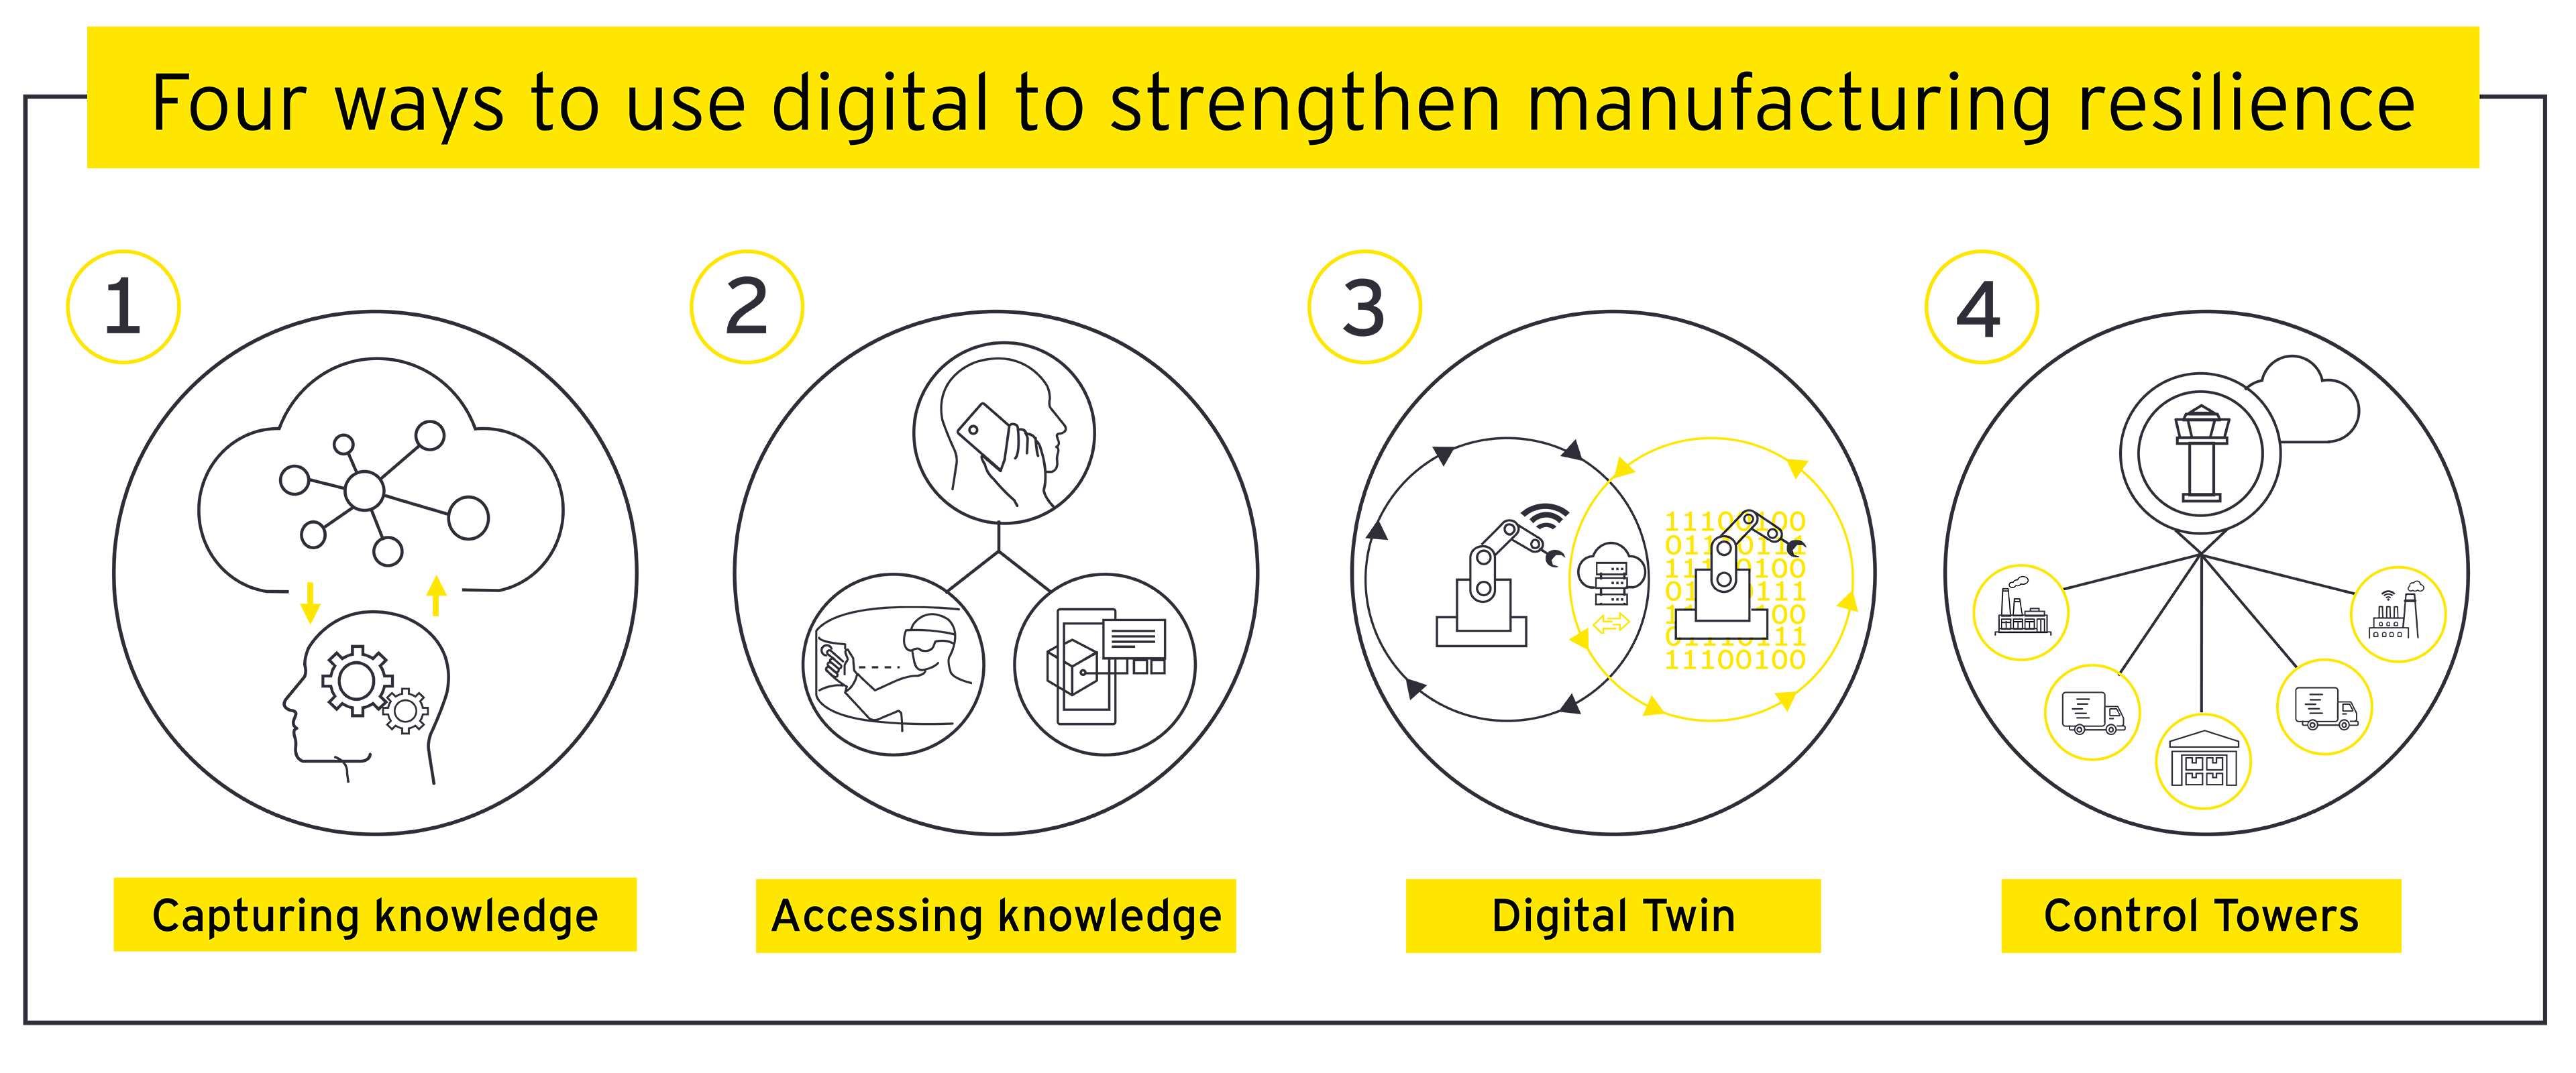 Four ways to use digital to strengthen manufacturing